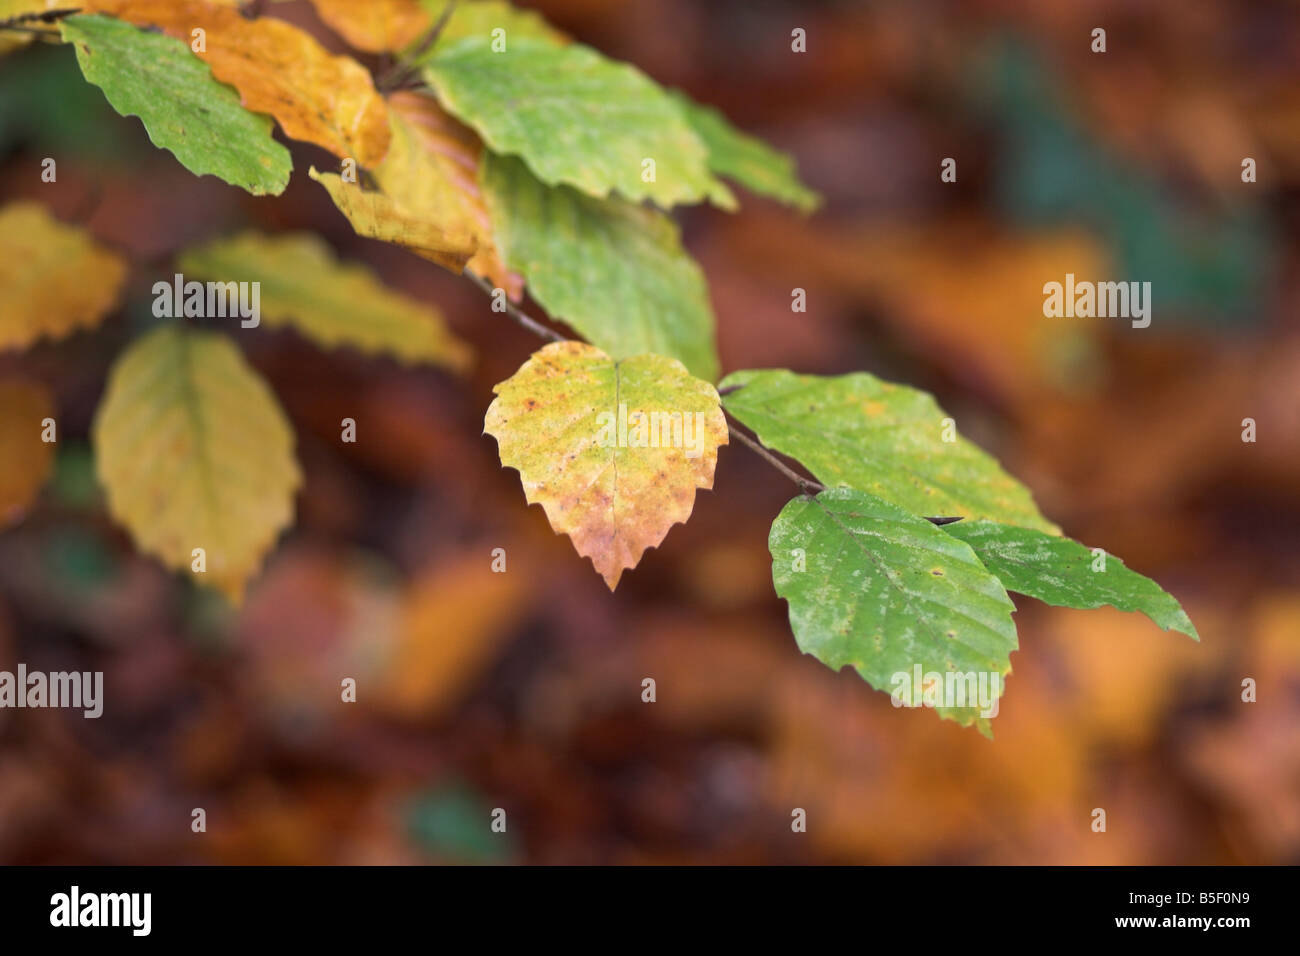 Autumn beech leaves against a blurred background, UK Stock Photo